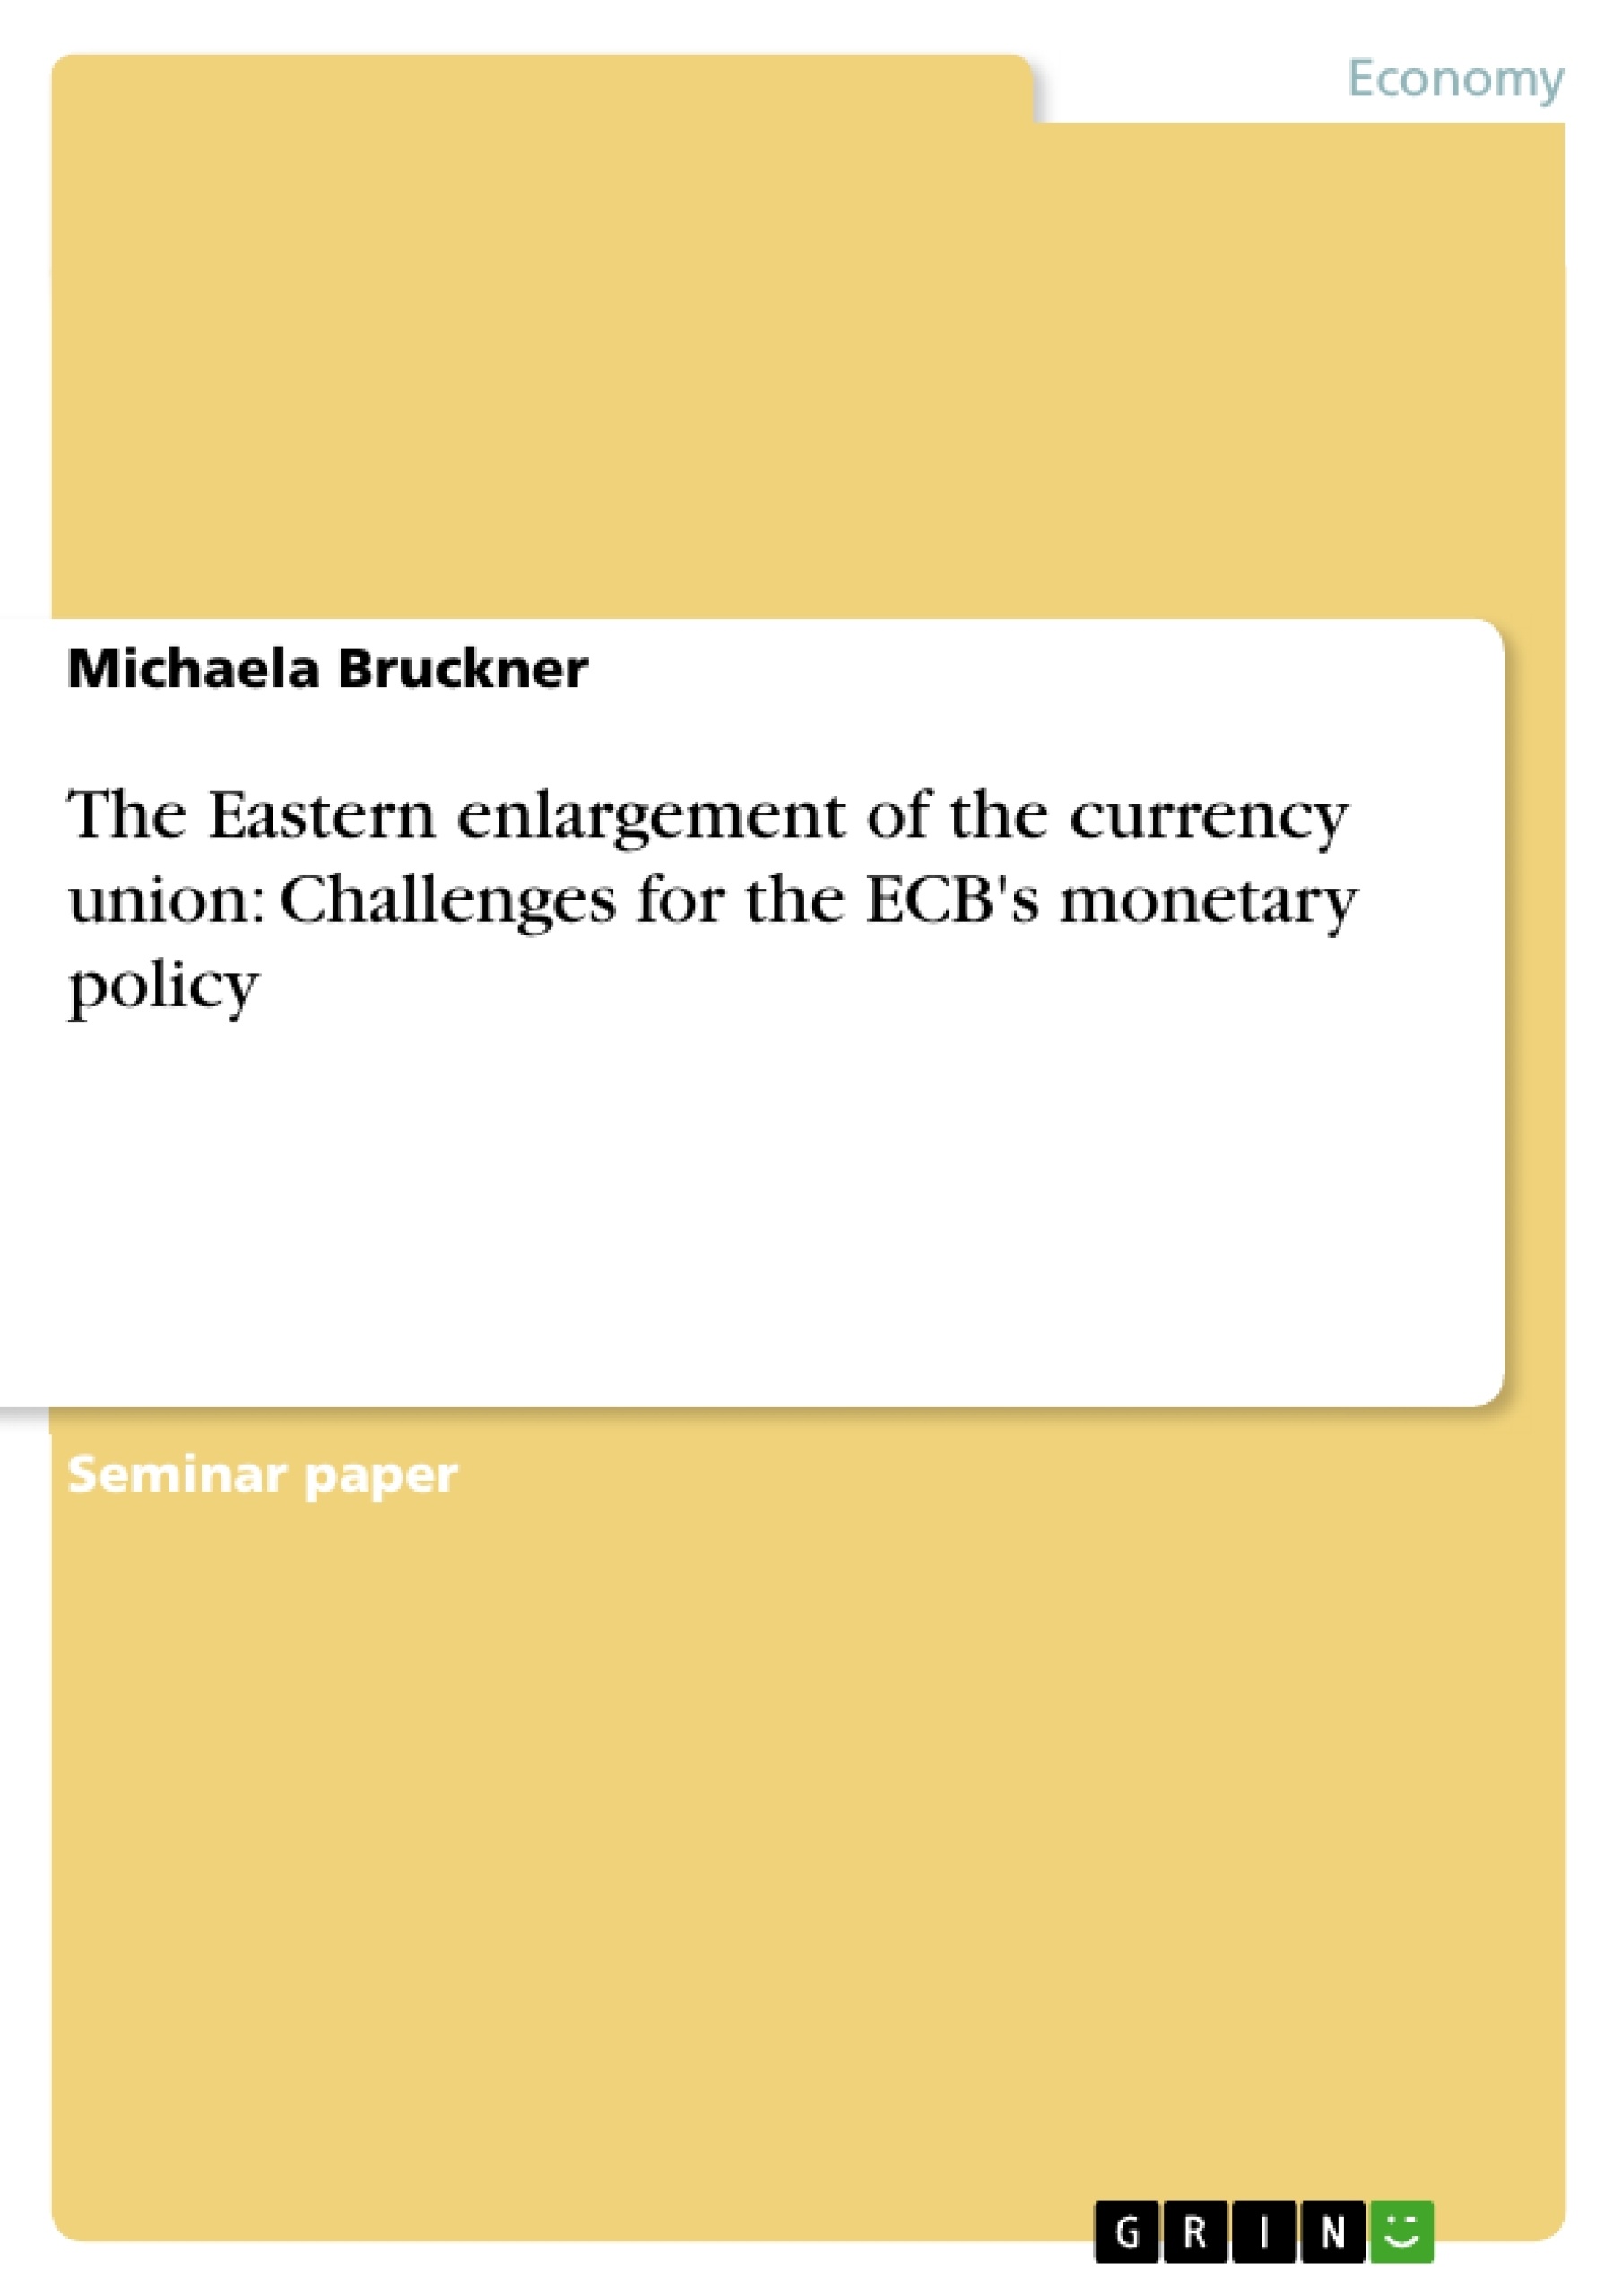 Título: The Eastern enlargement of the currency union: Challenges for the ECB's monetary policy 